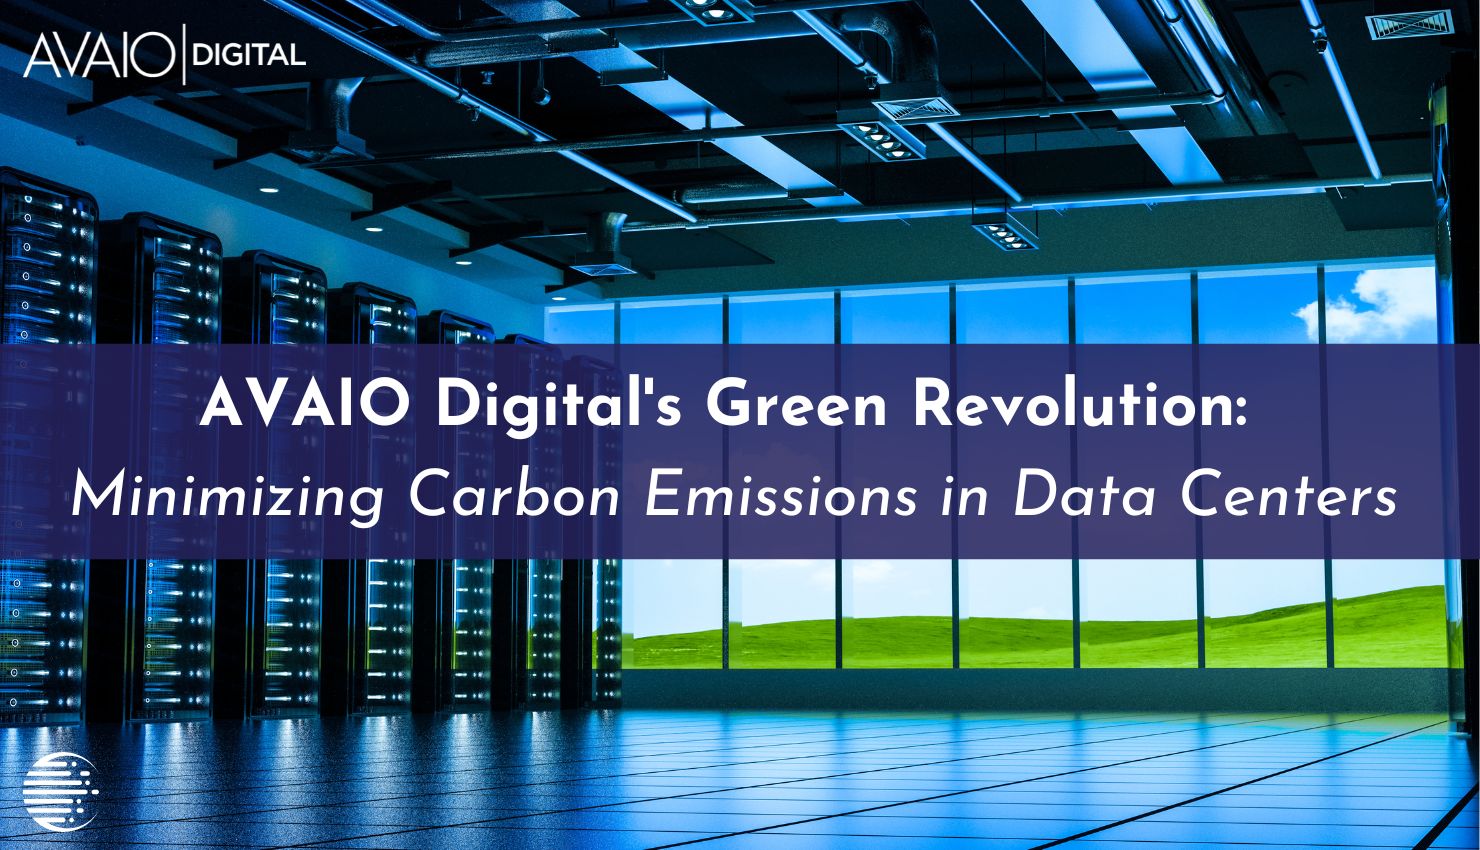 Featured image for “AVAIO Digital’s Green Revolution: Minimizing Carbon Emissions in Data Centers”